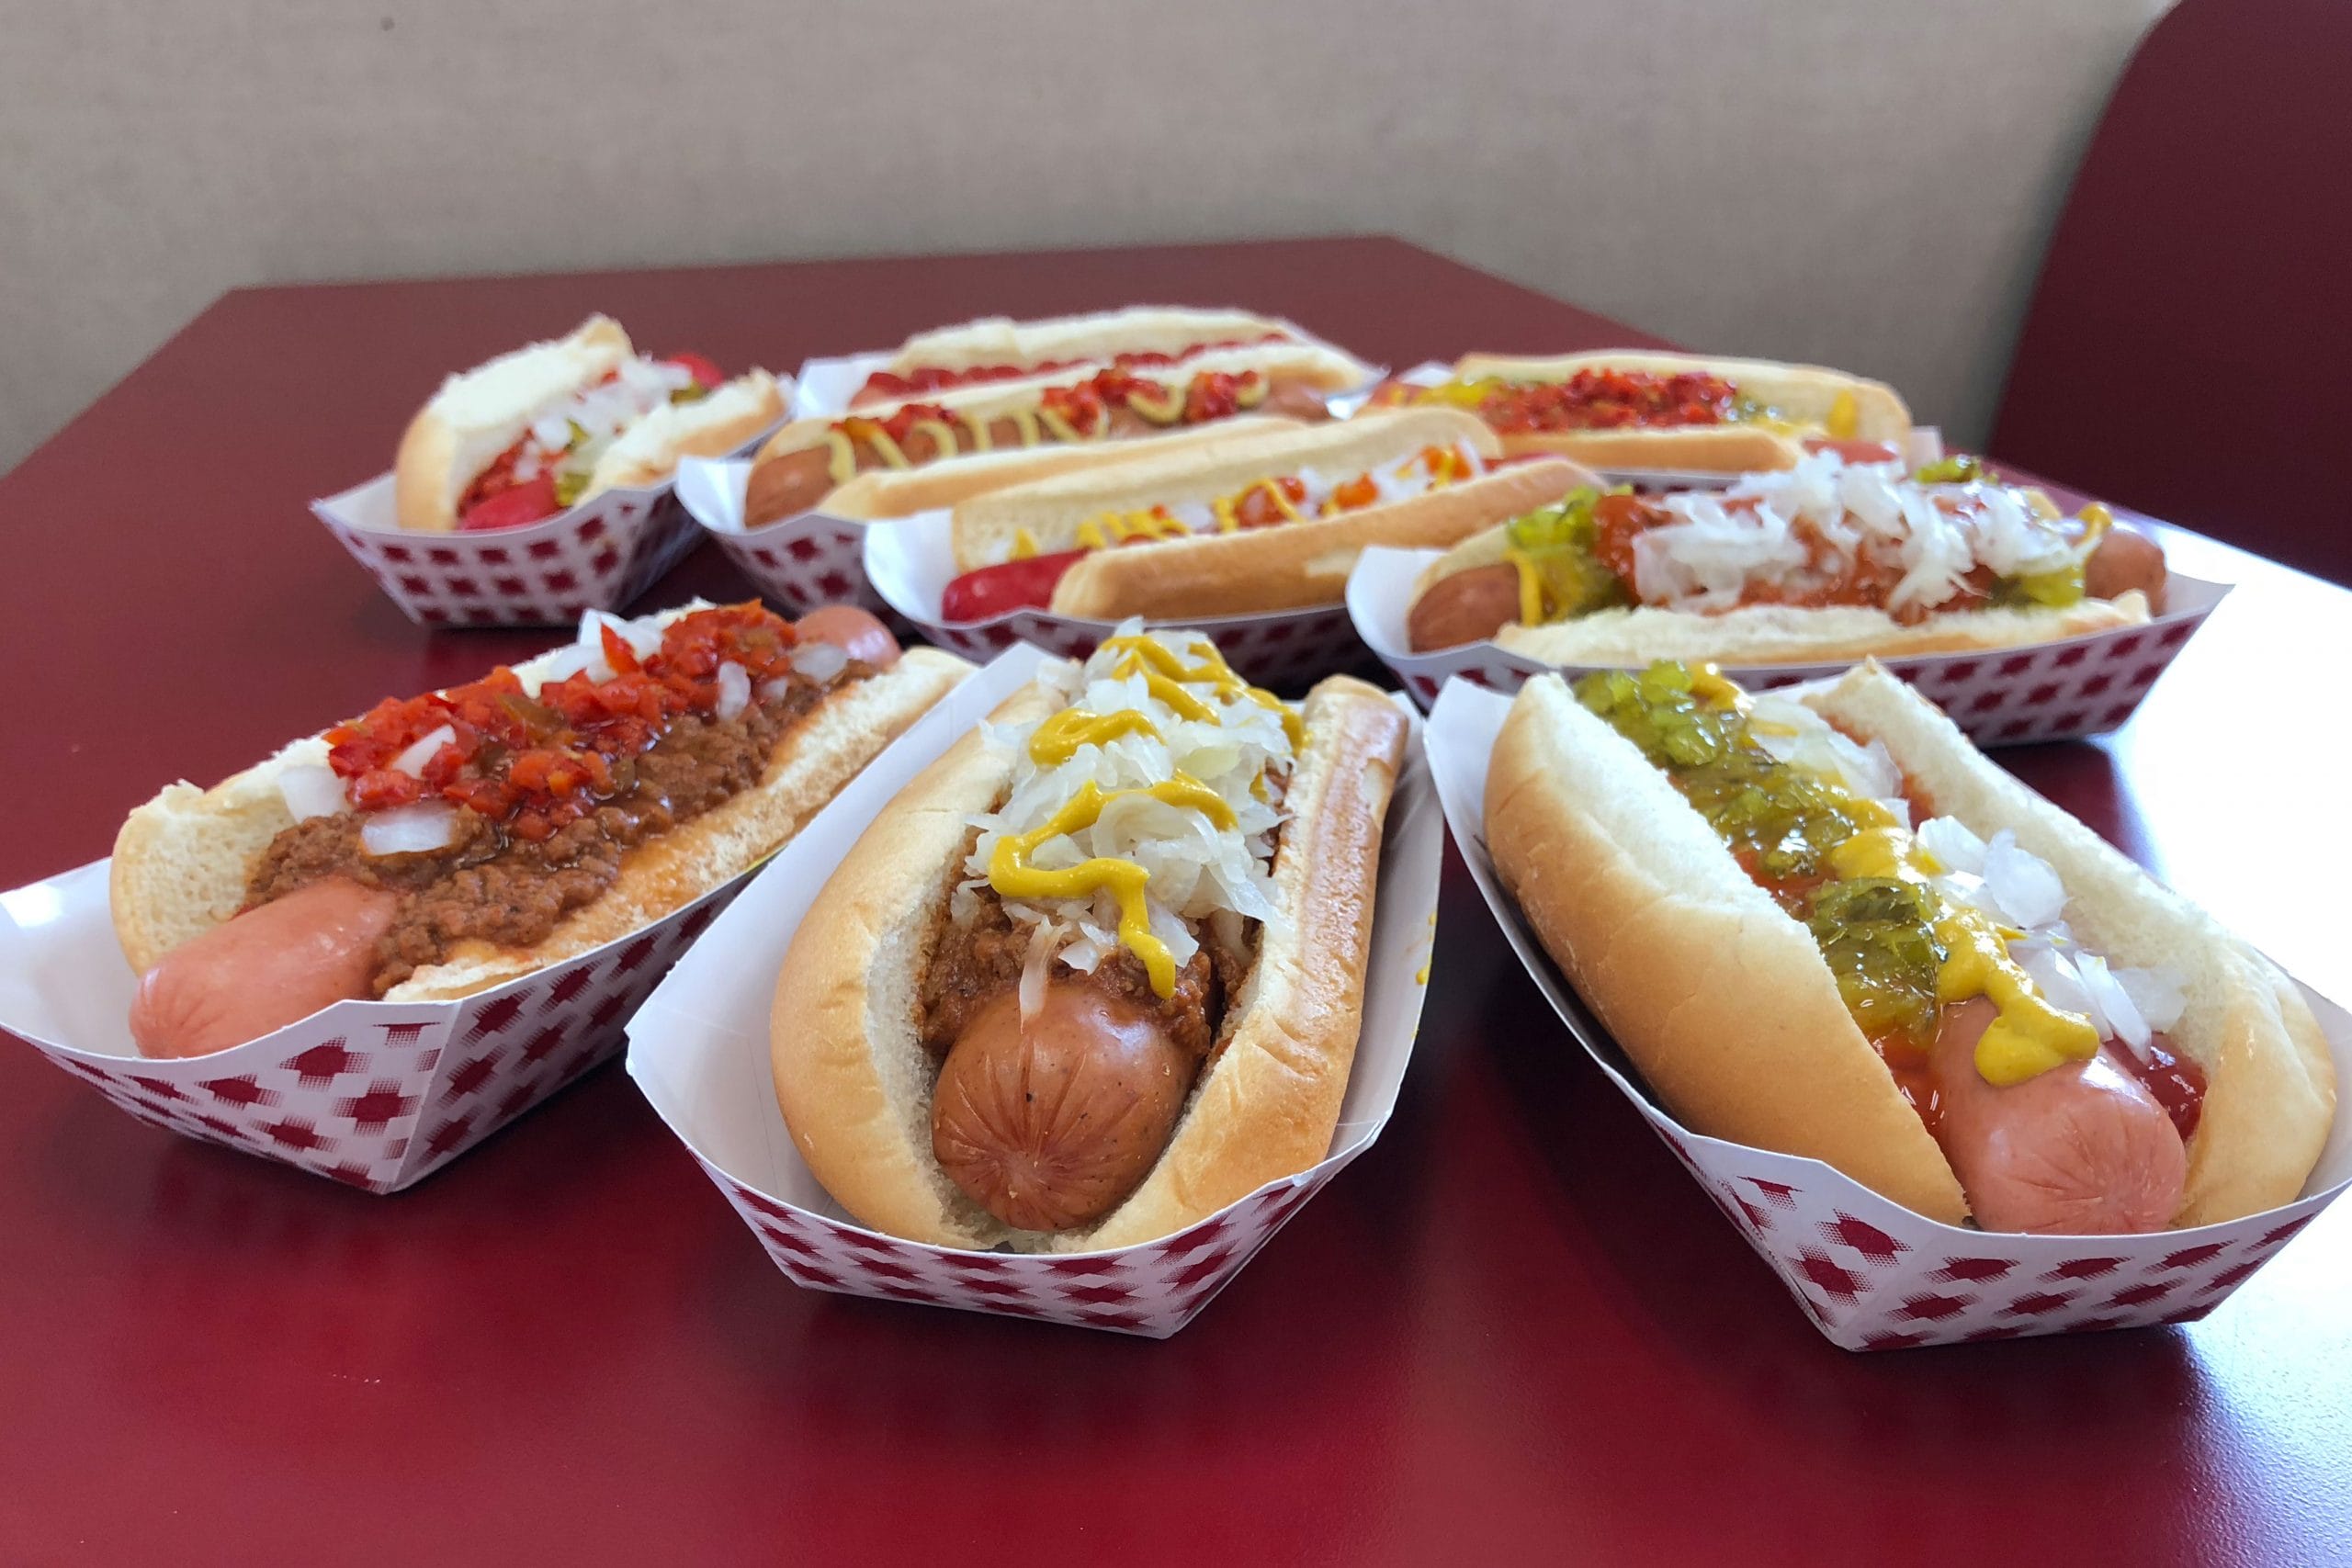 A variety of hot dogs with different toppings